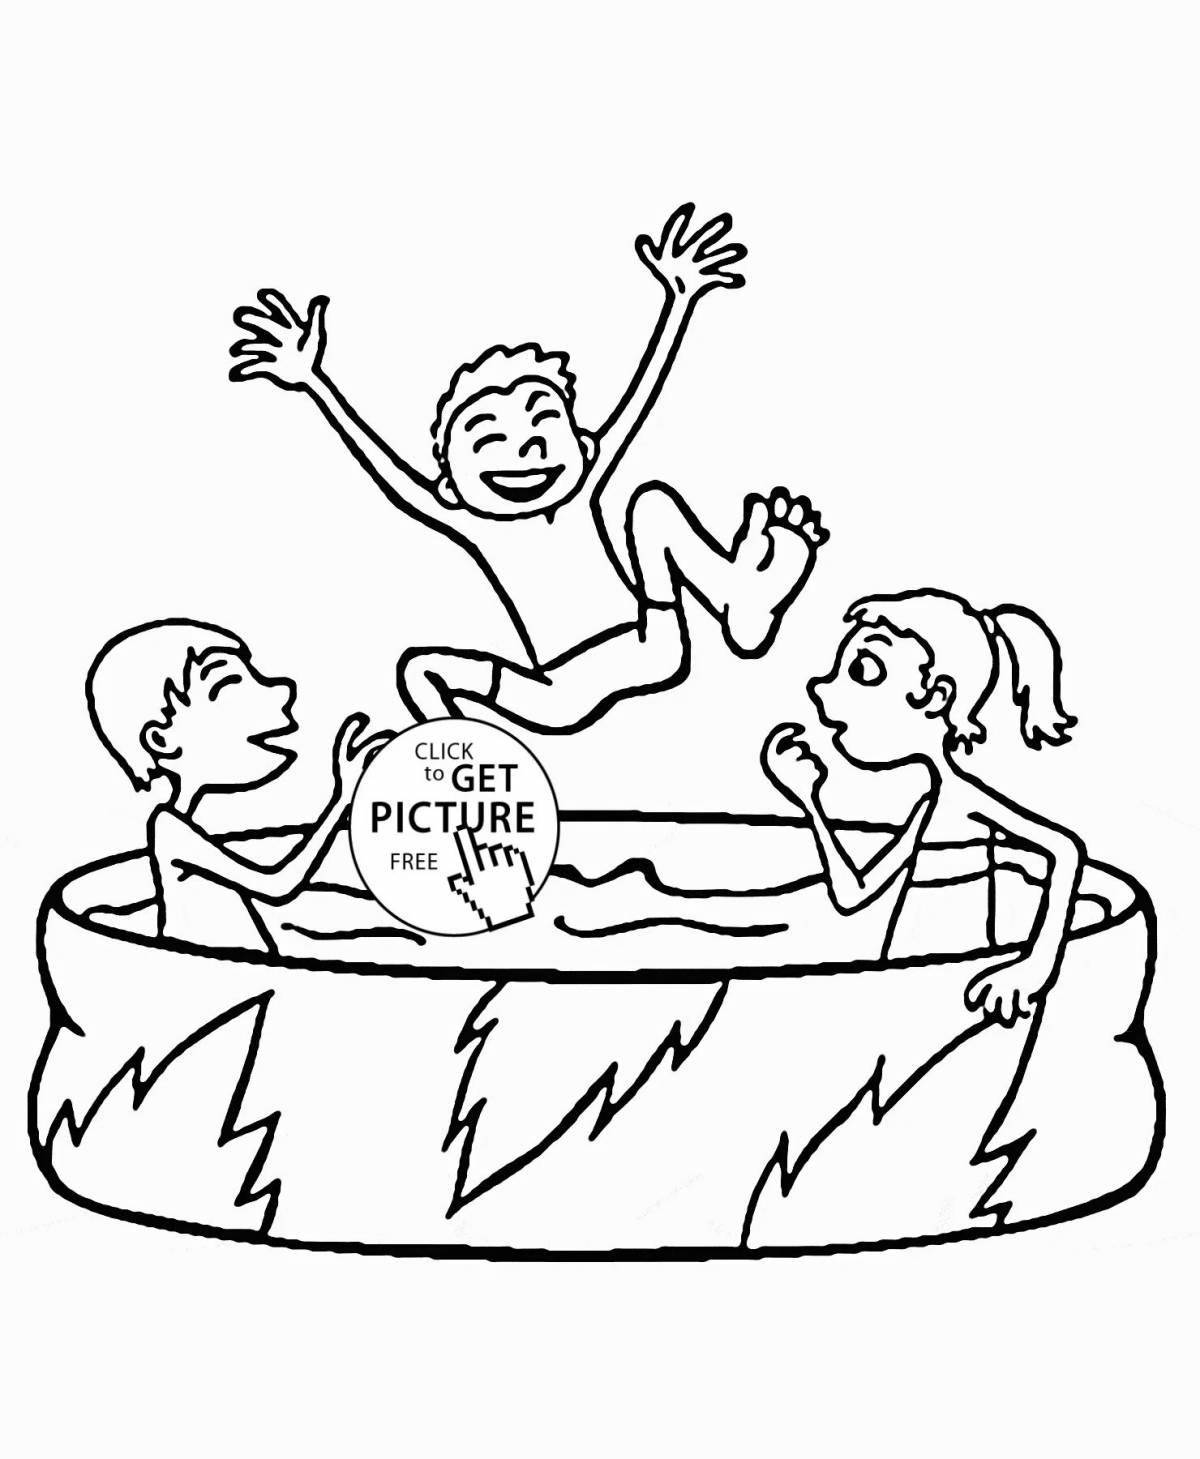 Awesome synchronized swimming coloring pages